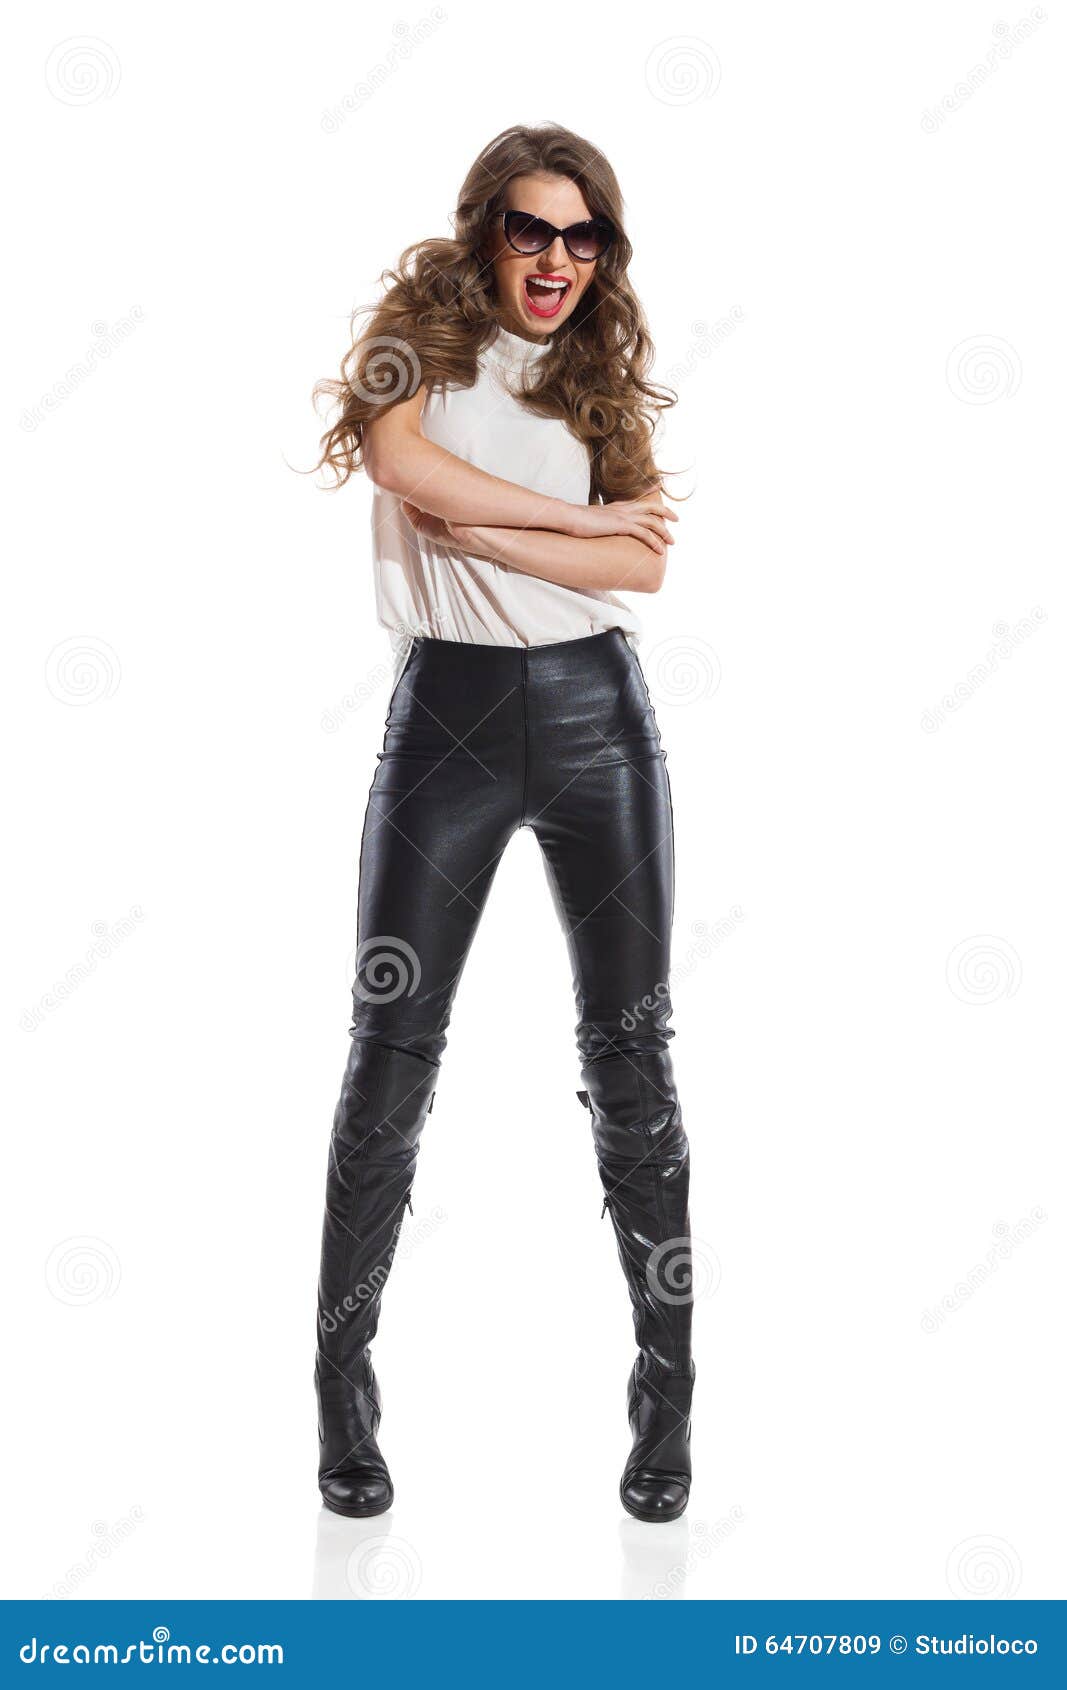 Shouting Woman in Leather Trousers Stock Image - Image of crossed ...